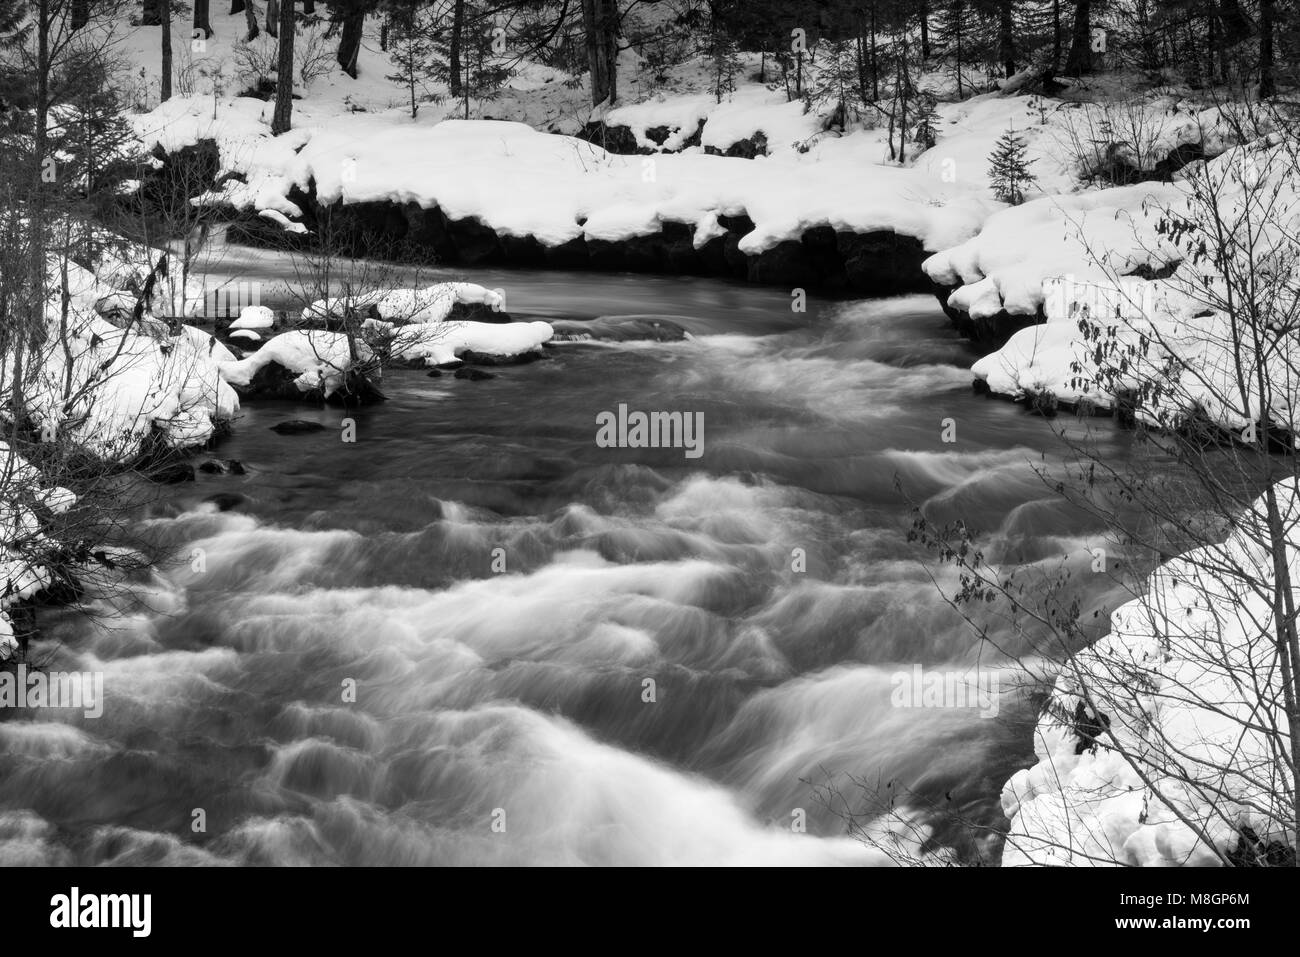 The Rogue River is flowing unfrozen creating whitecaps deep in the forest in winter Stock Photo